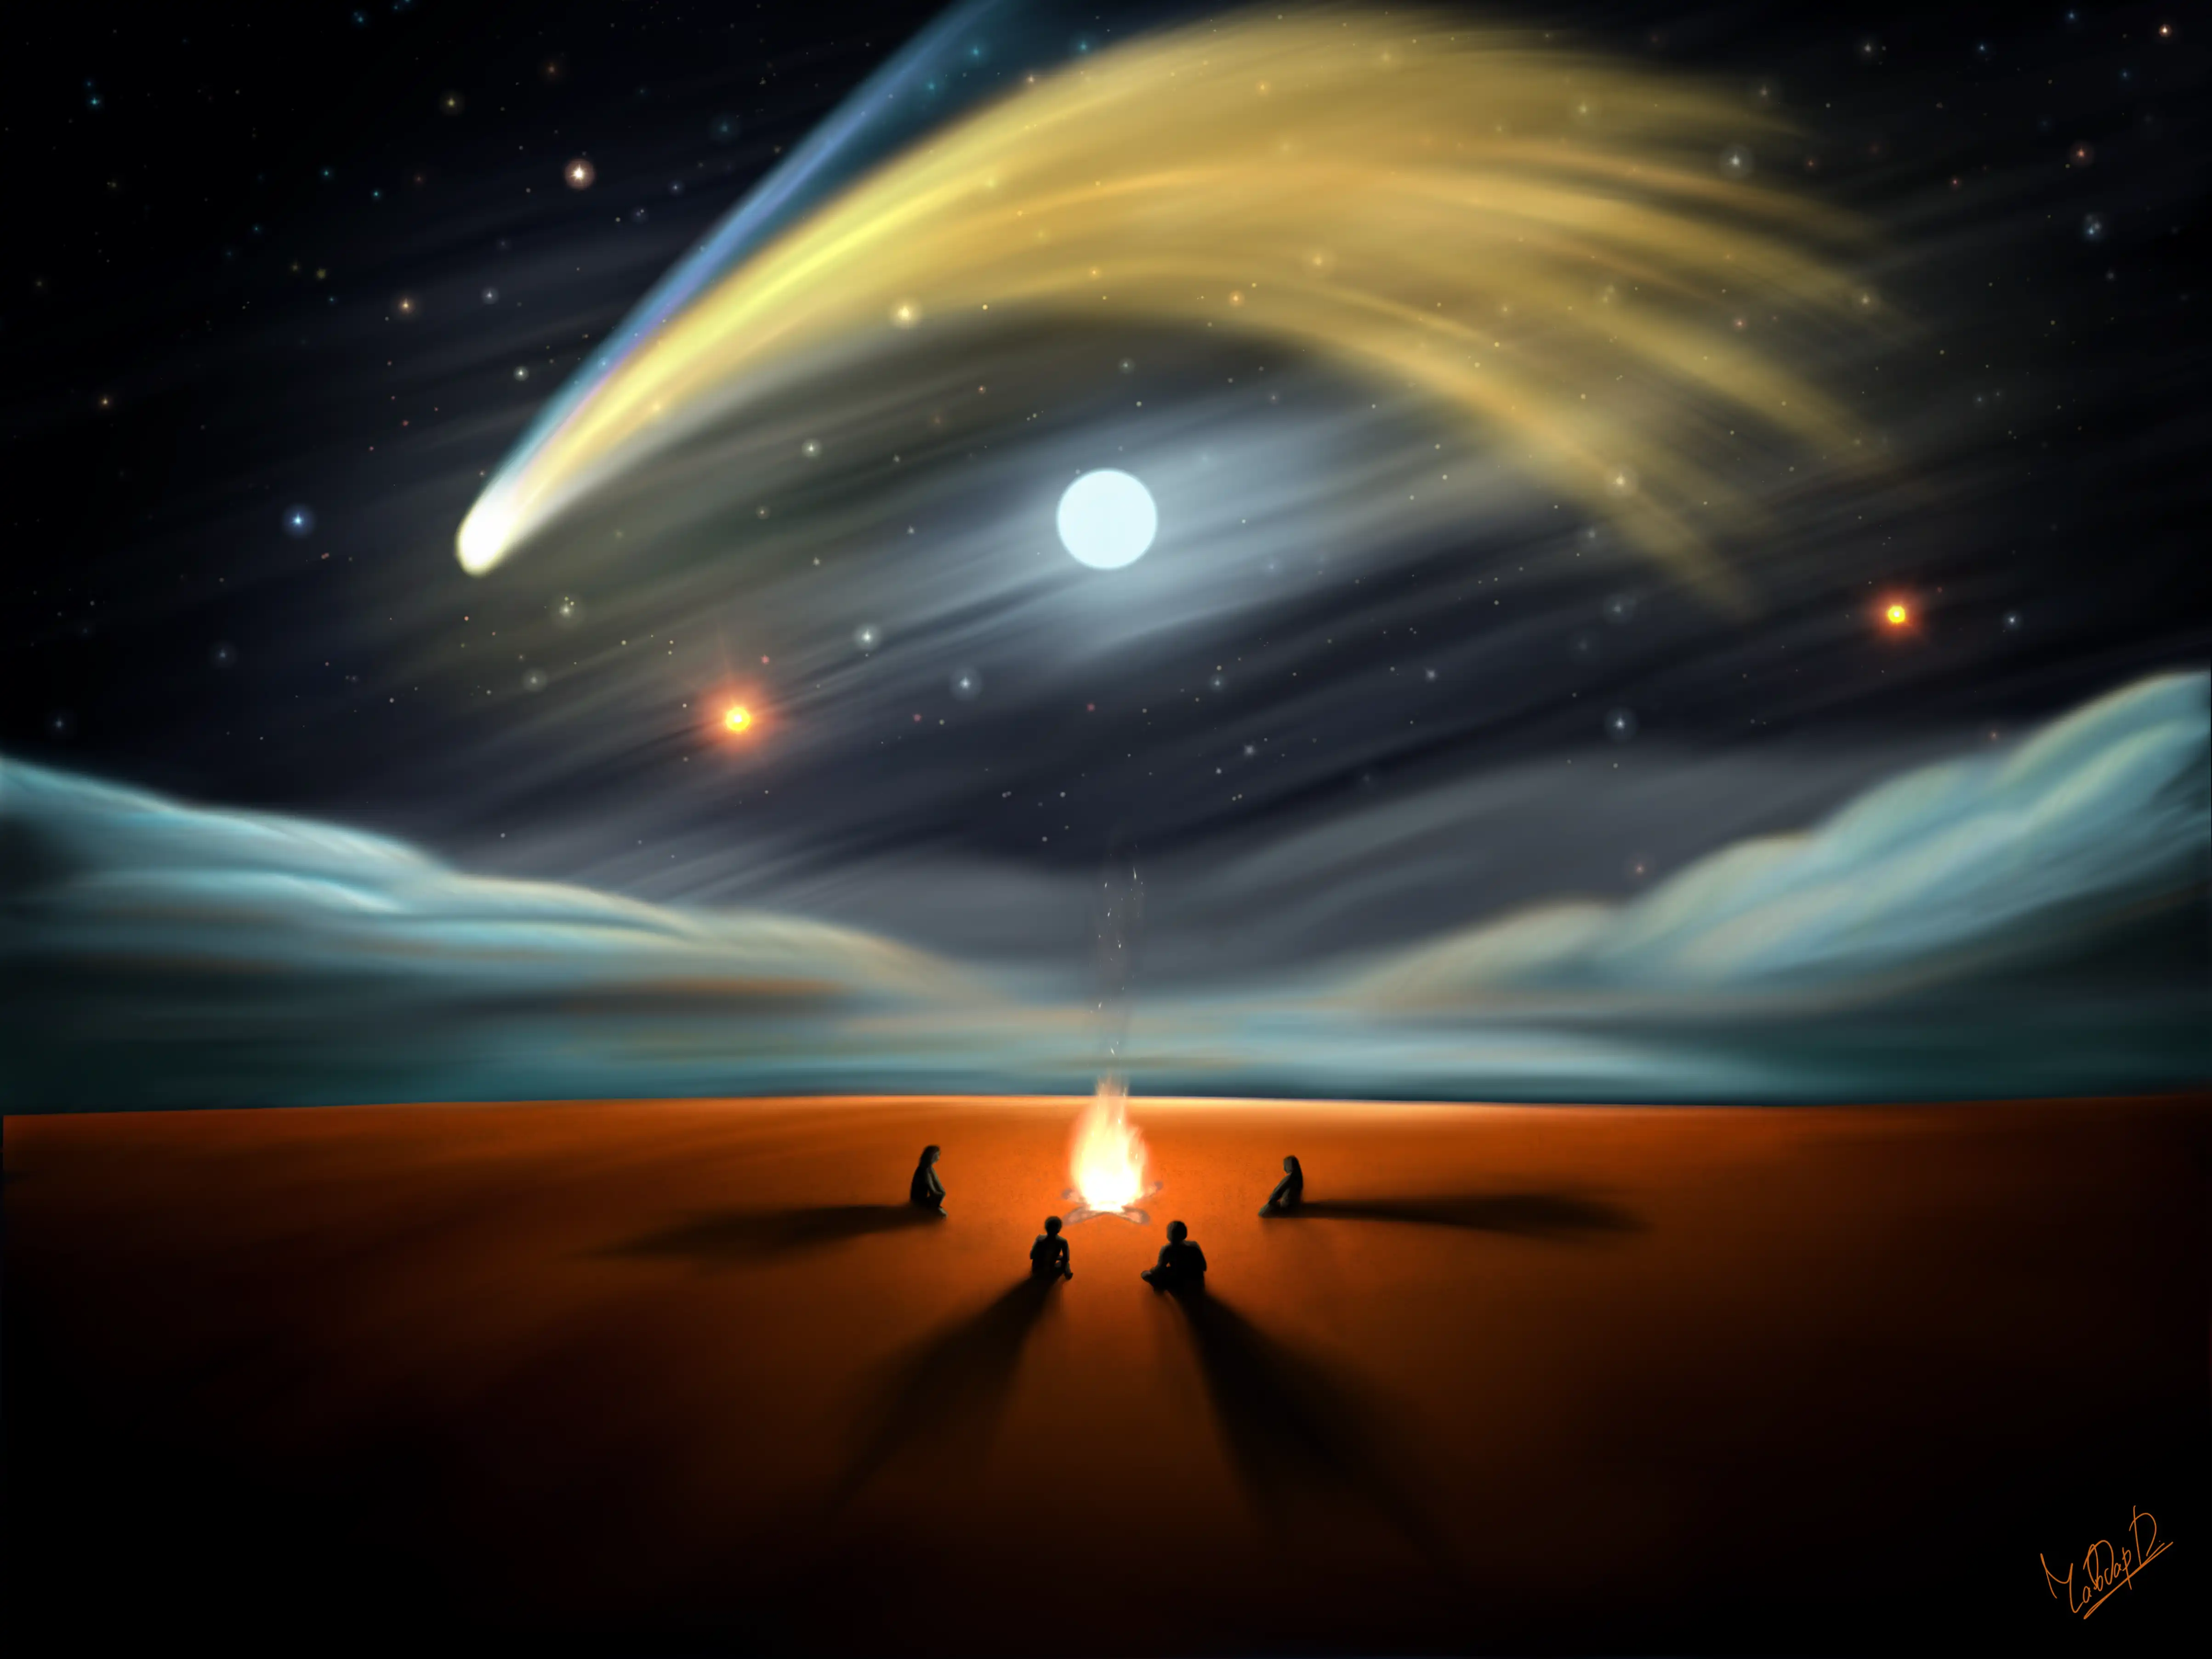 A comet in the night sky, digital drawing